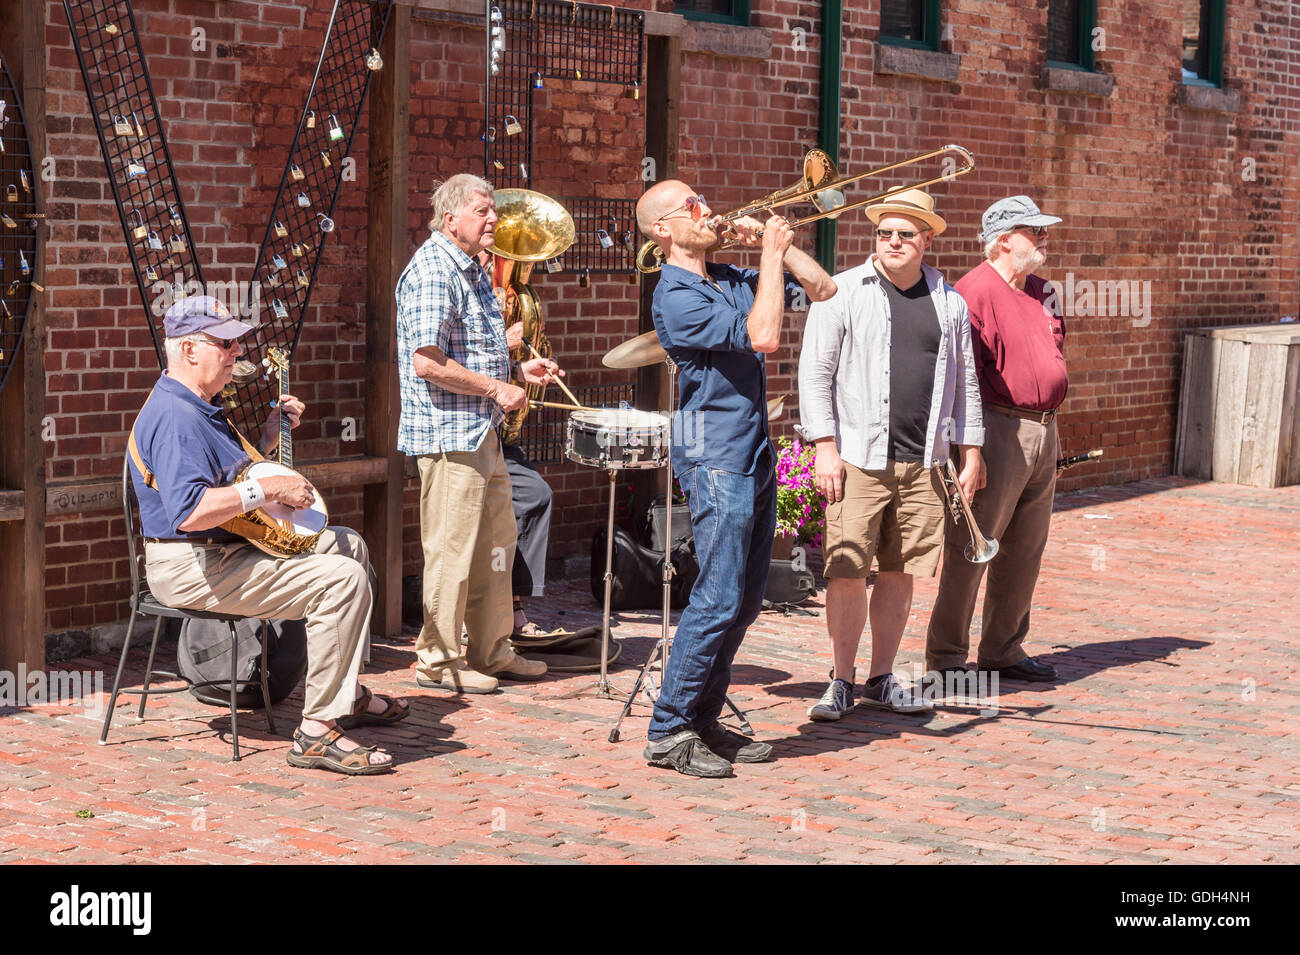 TORONTO, CANADA - JULY 1, 2016: Band playing music in the street, in Distillery District. Stock Photo